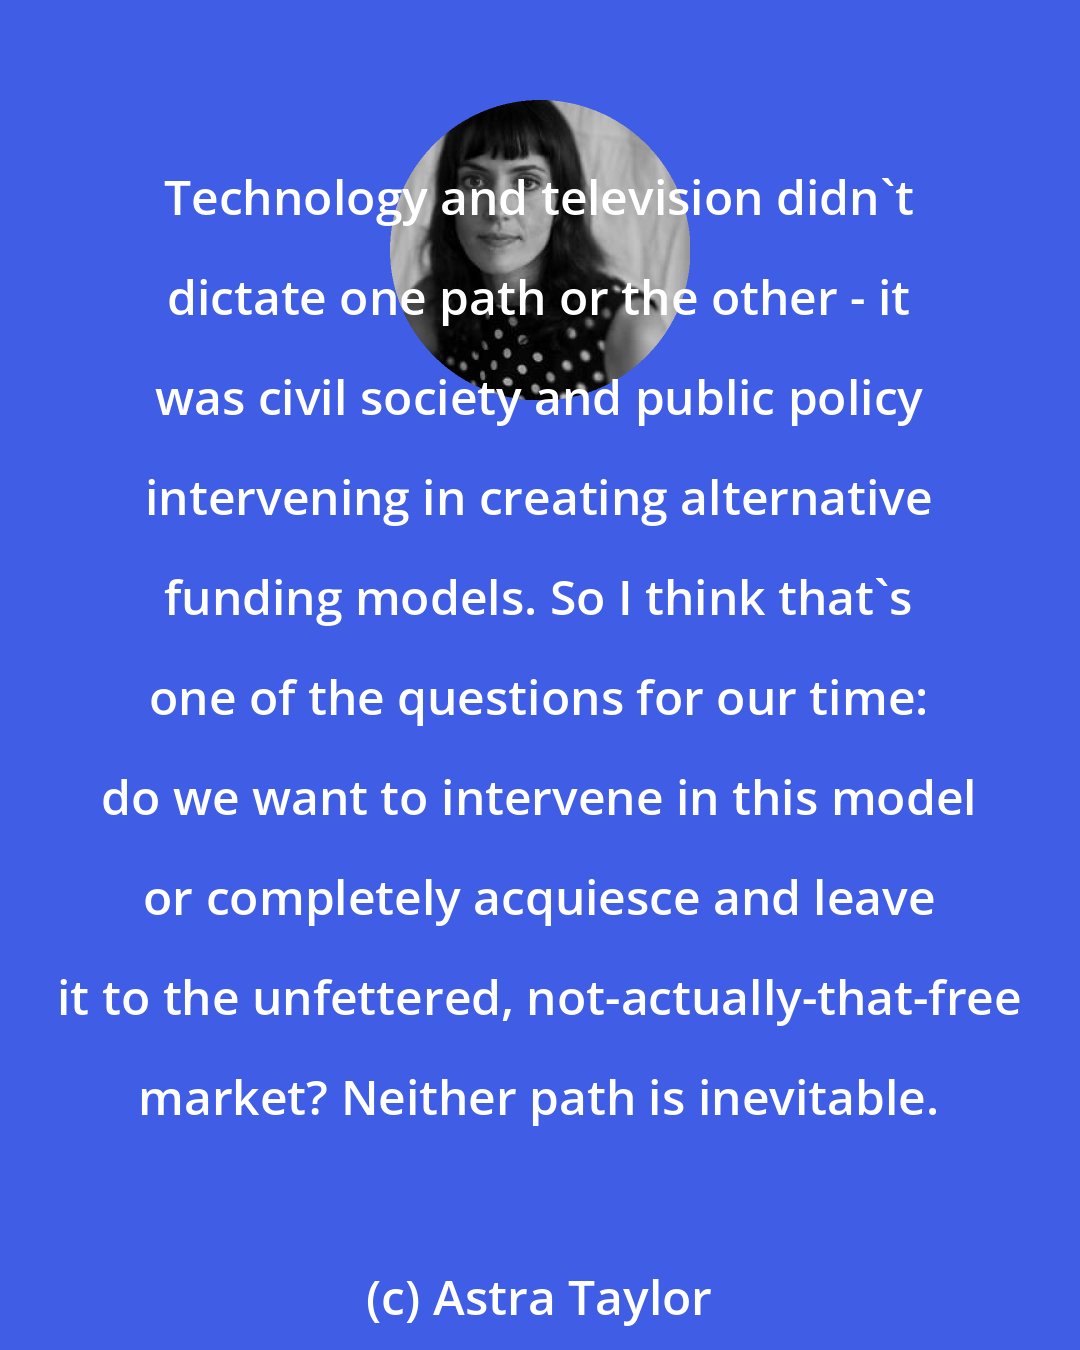 Astra Taylor: Technology and television didn't dictate one path or the other - it was civil society and public policy intervening in creating alternative funding models. So I think that's one of the questions for our time: do we want to intervene in this model or completely acquiesce and leave it to the unfettered, not-actually-that-free market? Neither path is inevitable.